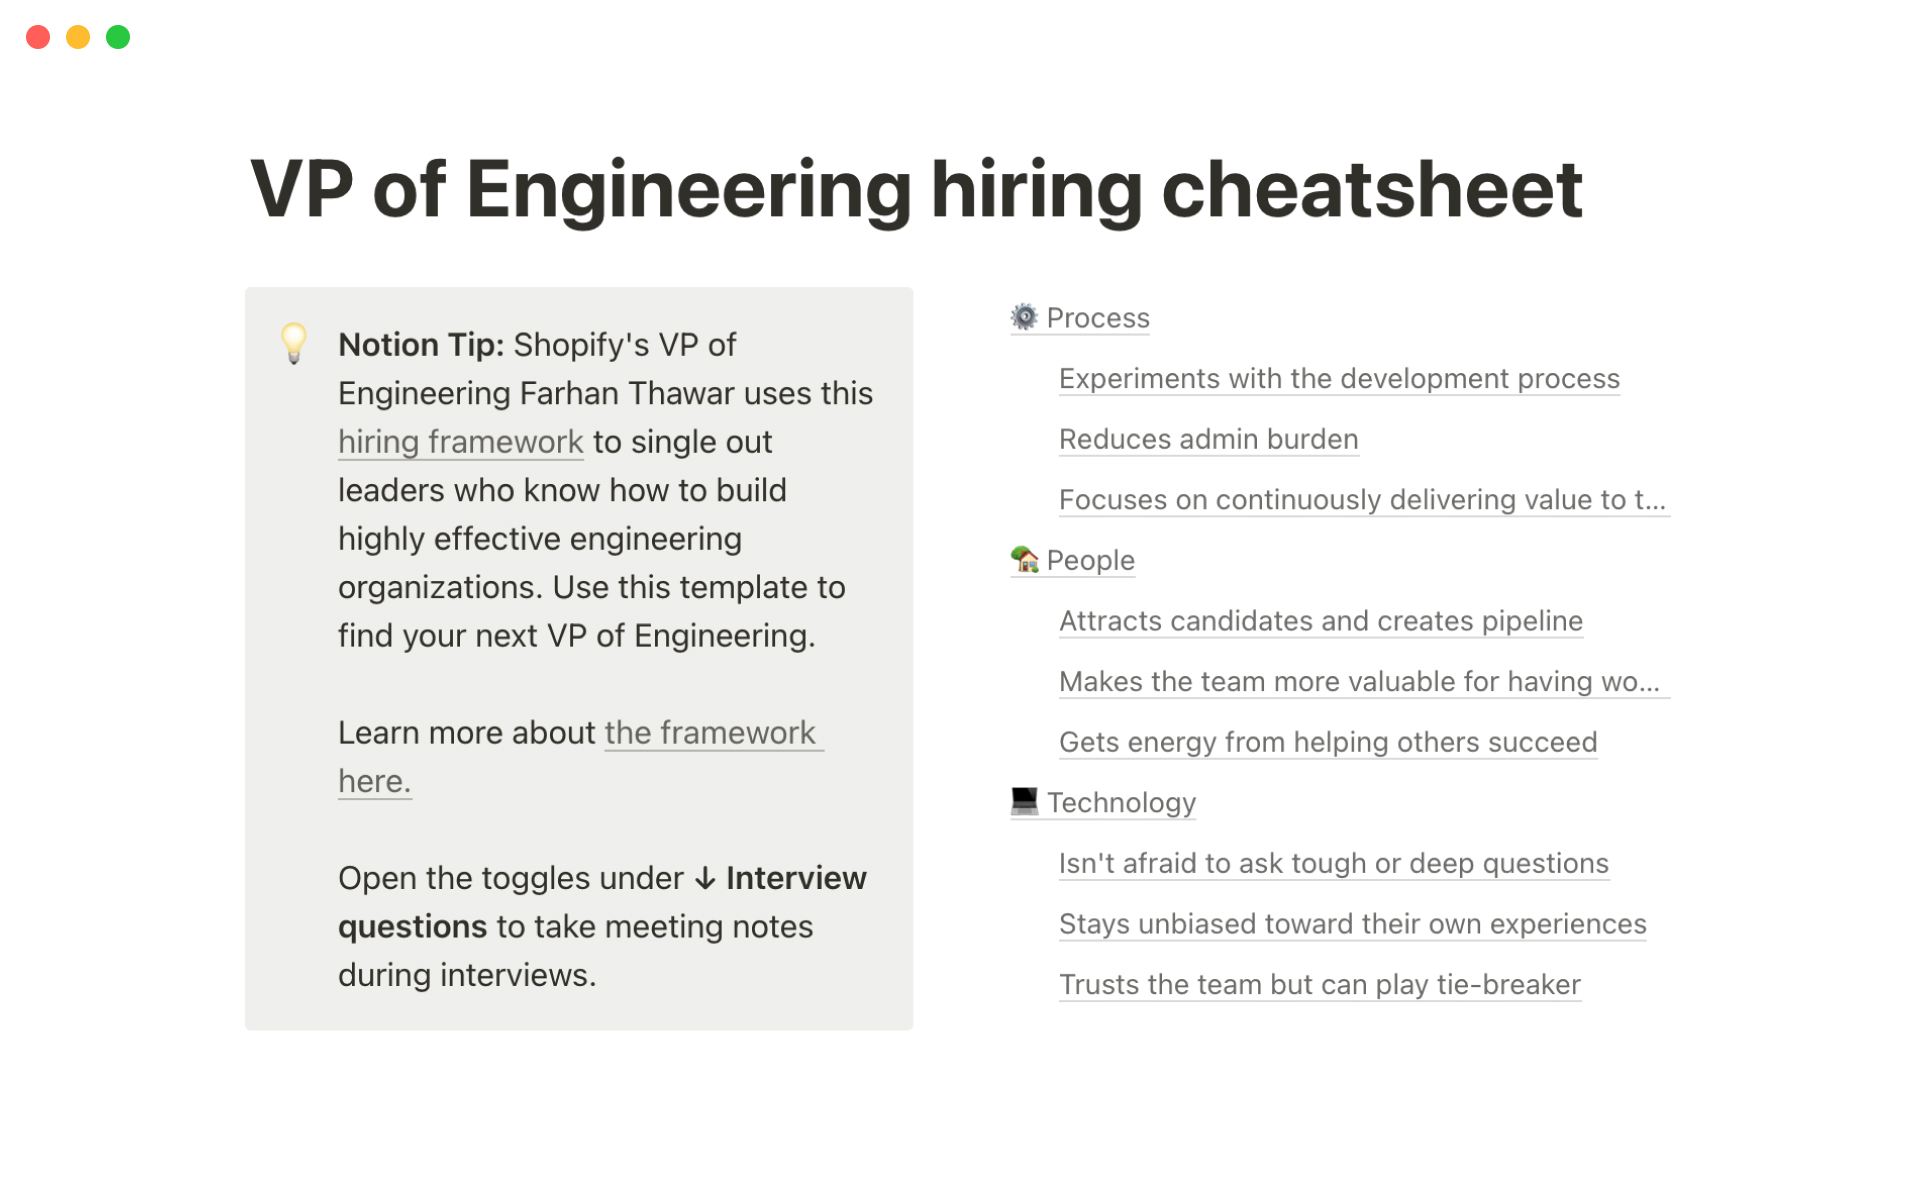 A template preview for Shopify's VP of Engineering hiring cheatsheet